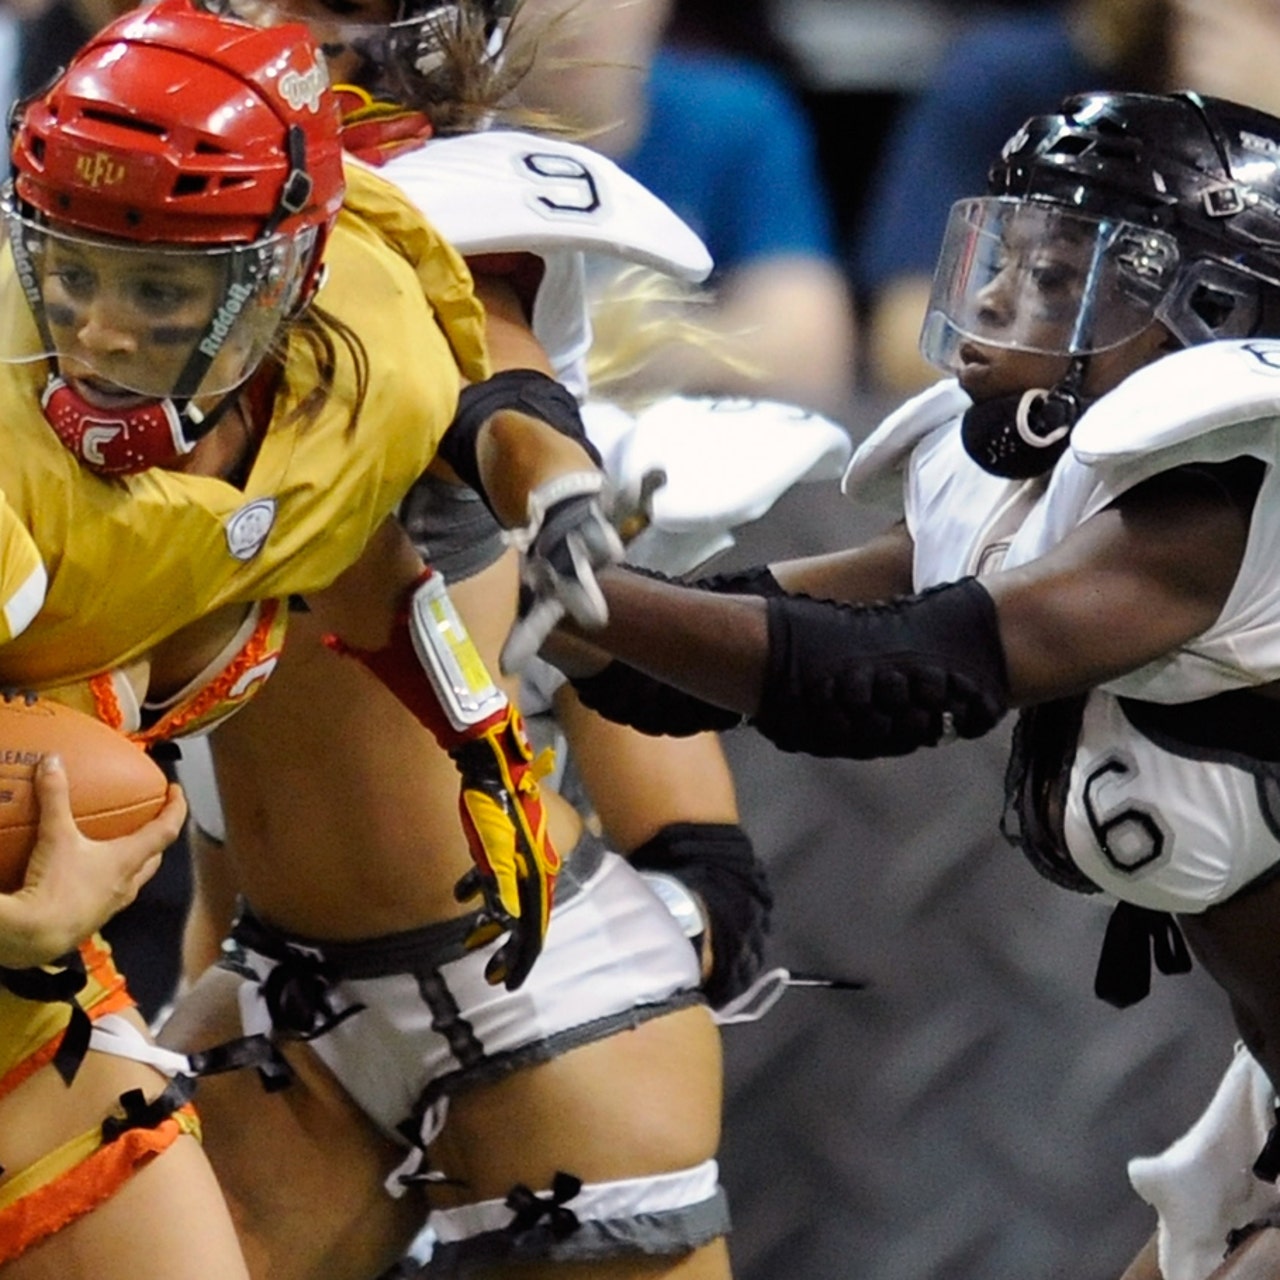 Lingerie Football League claims it fired officials now being used by NFL